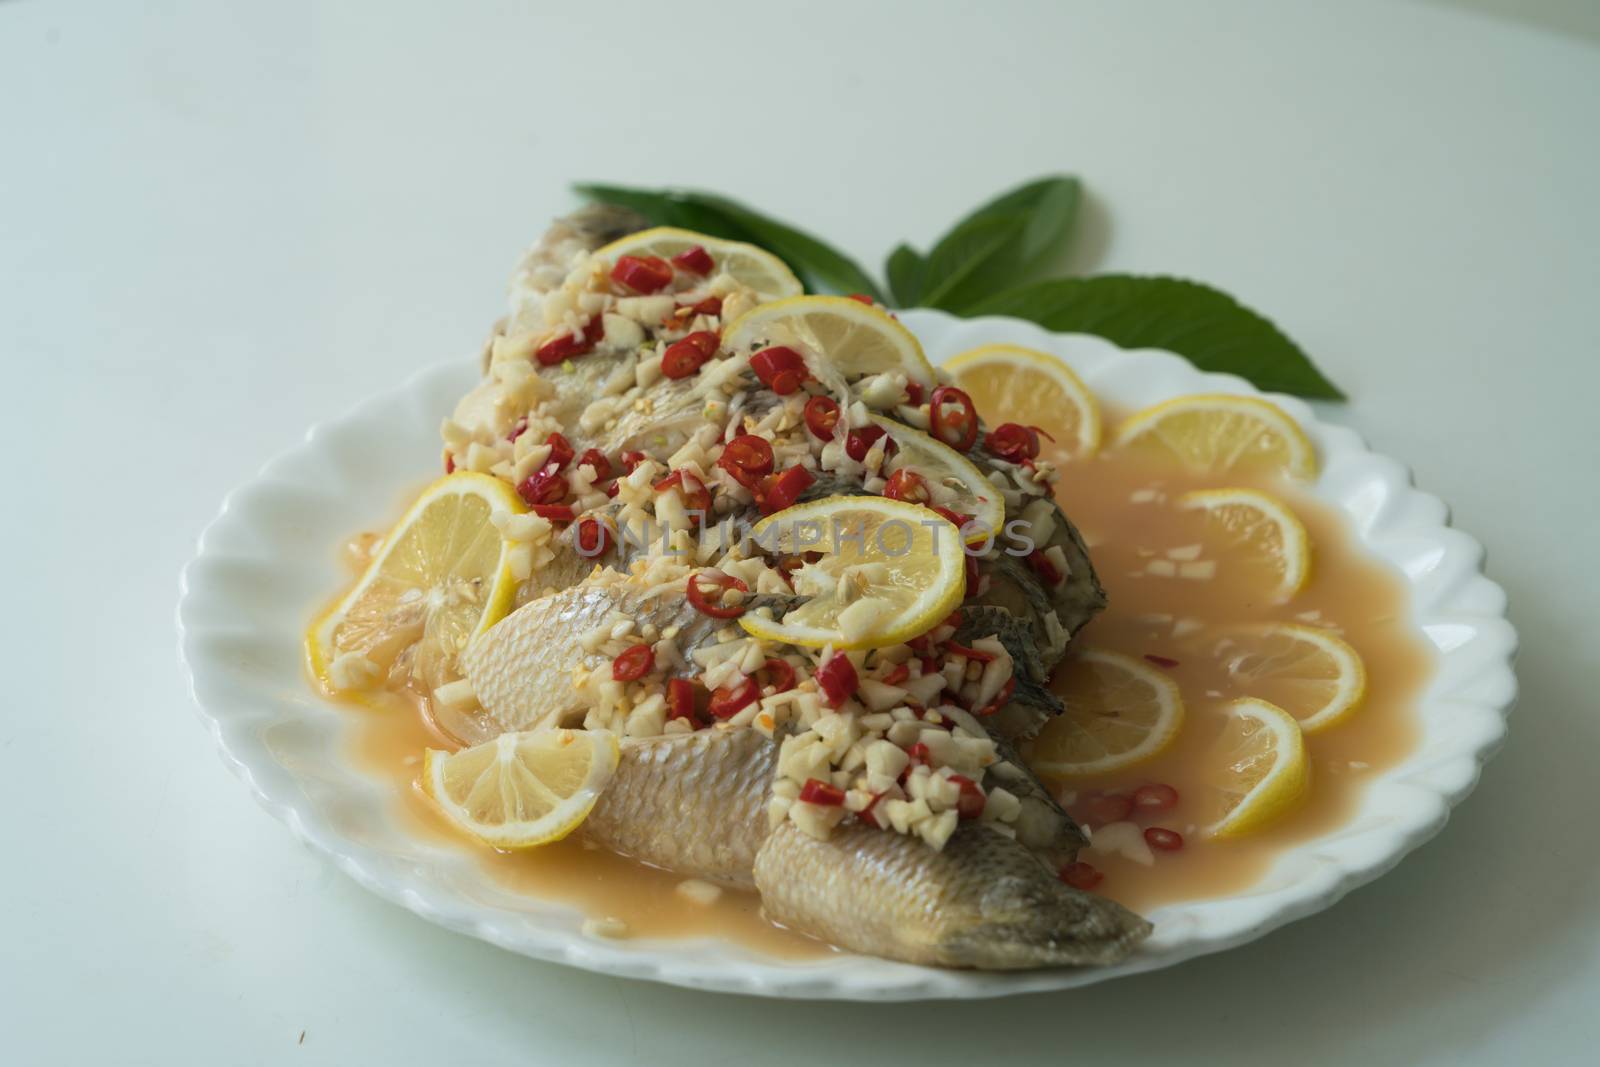 A Seabass steam with lemon, garlic and red chili - Thai food, on white plate